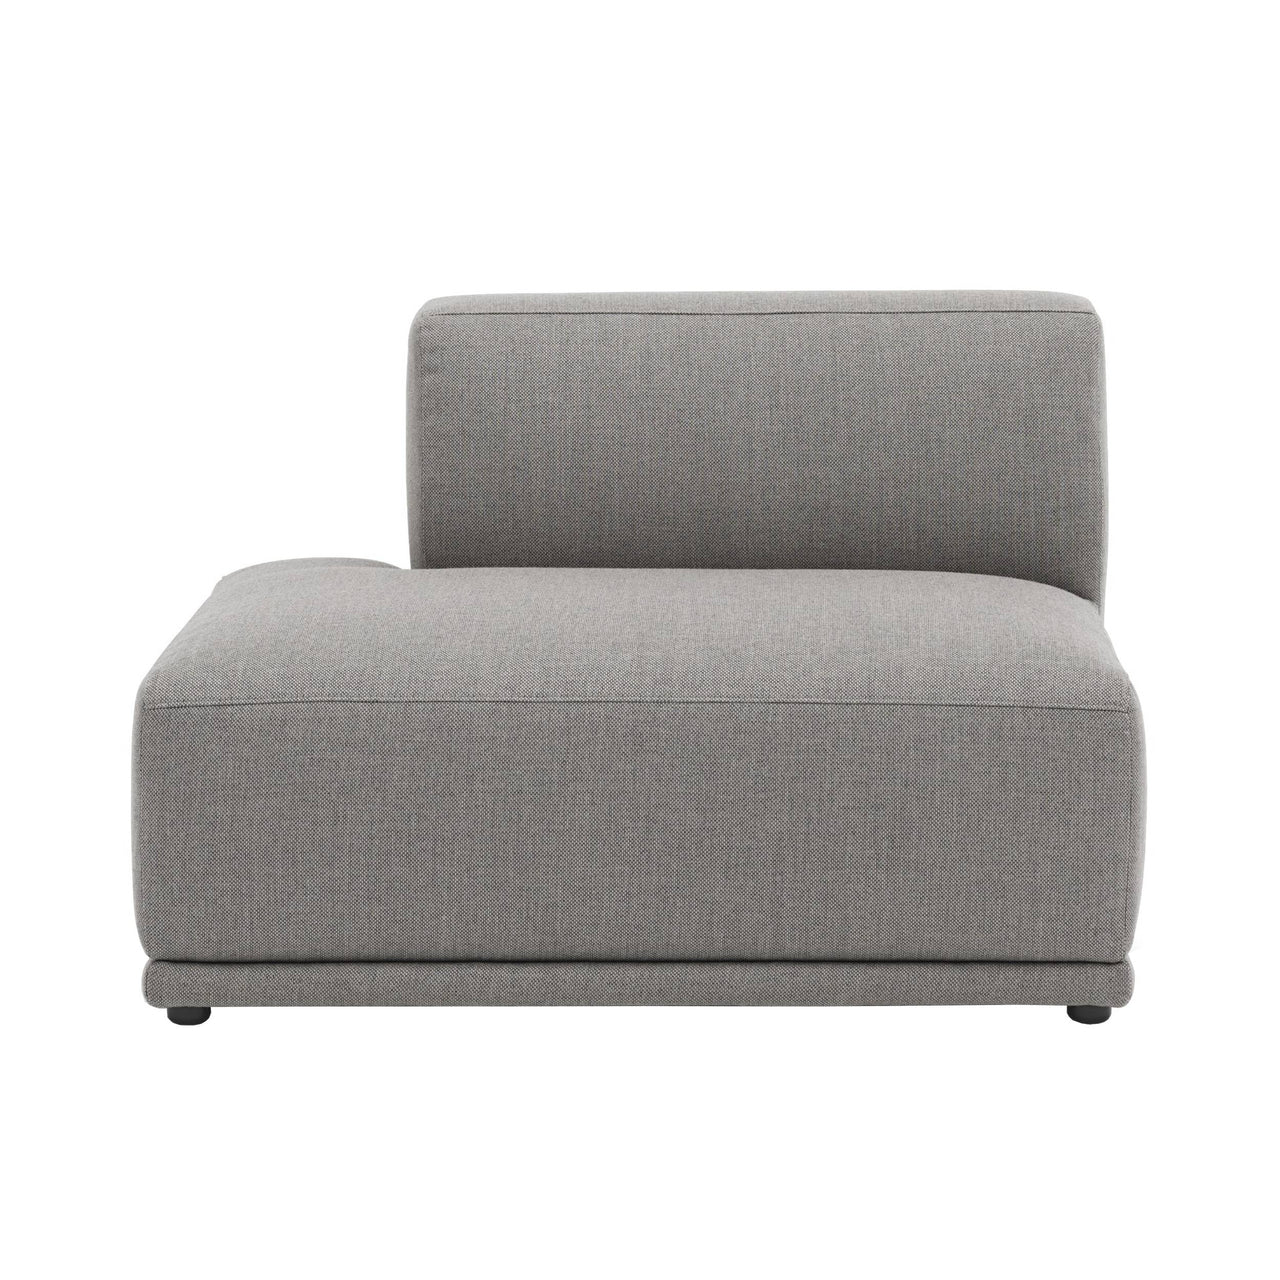 Connect Soft Sofa Modules: Left Open-Ended C  + Re-Wool 128